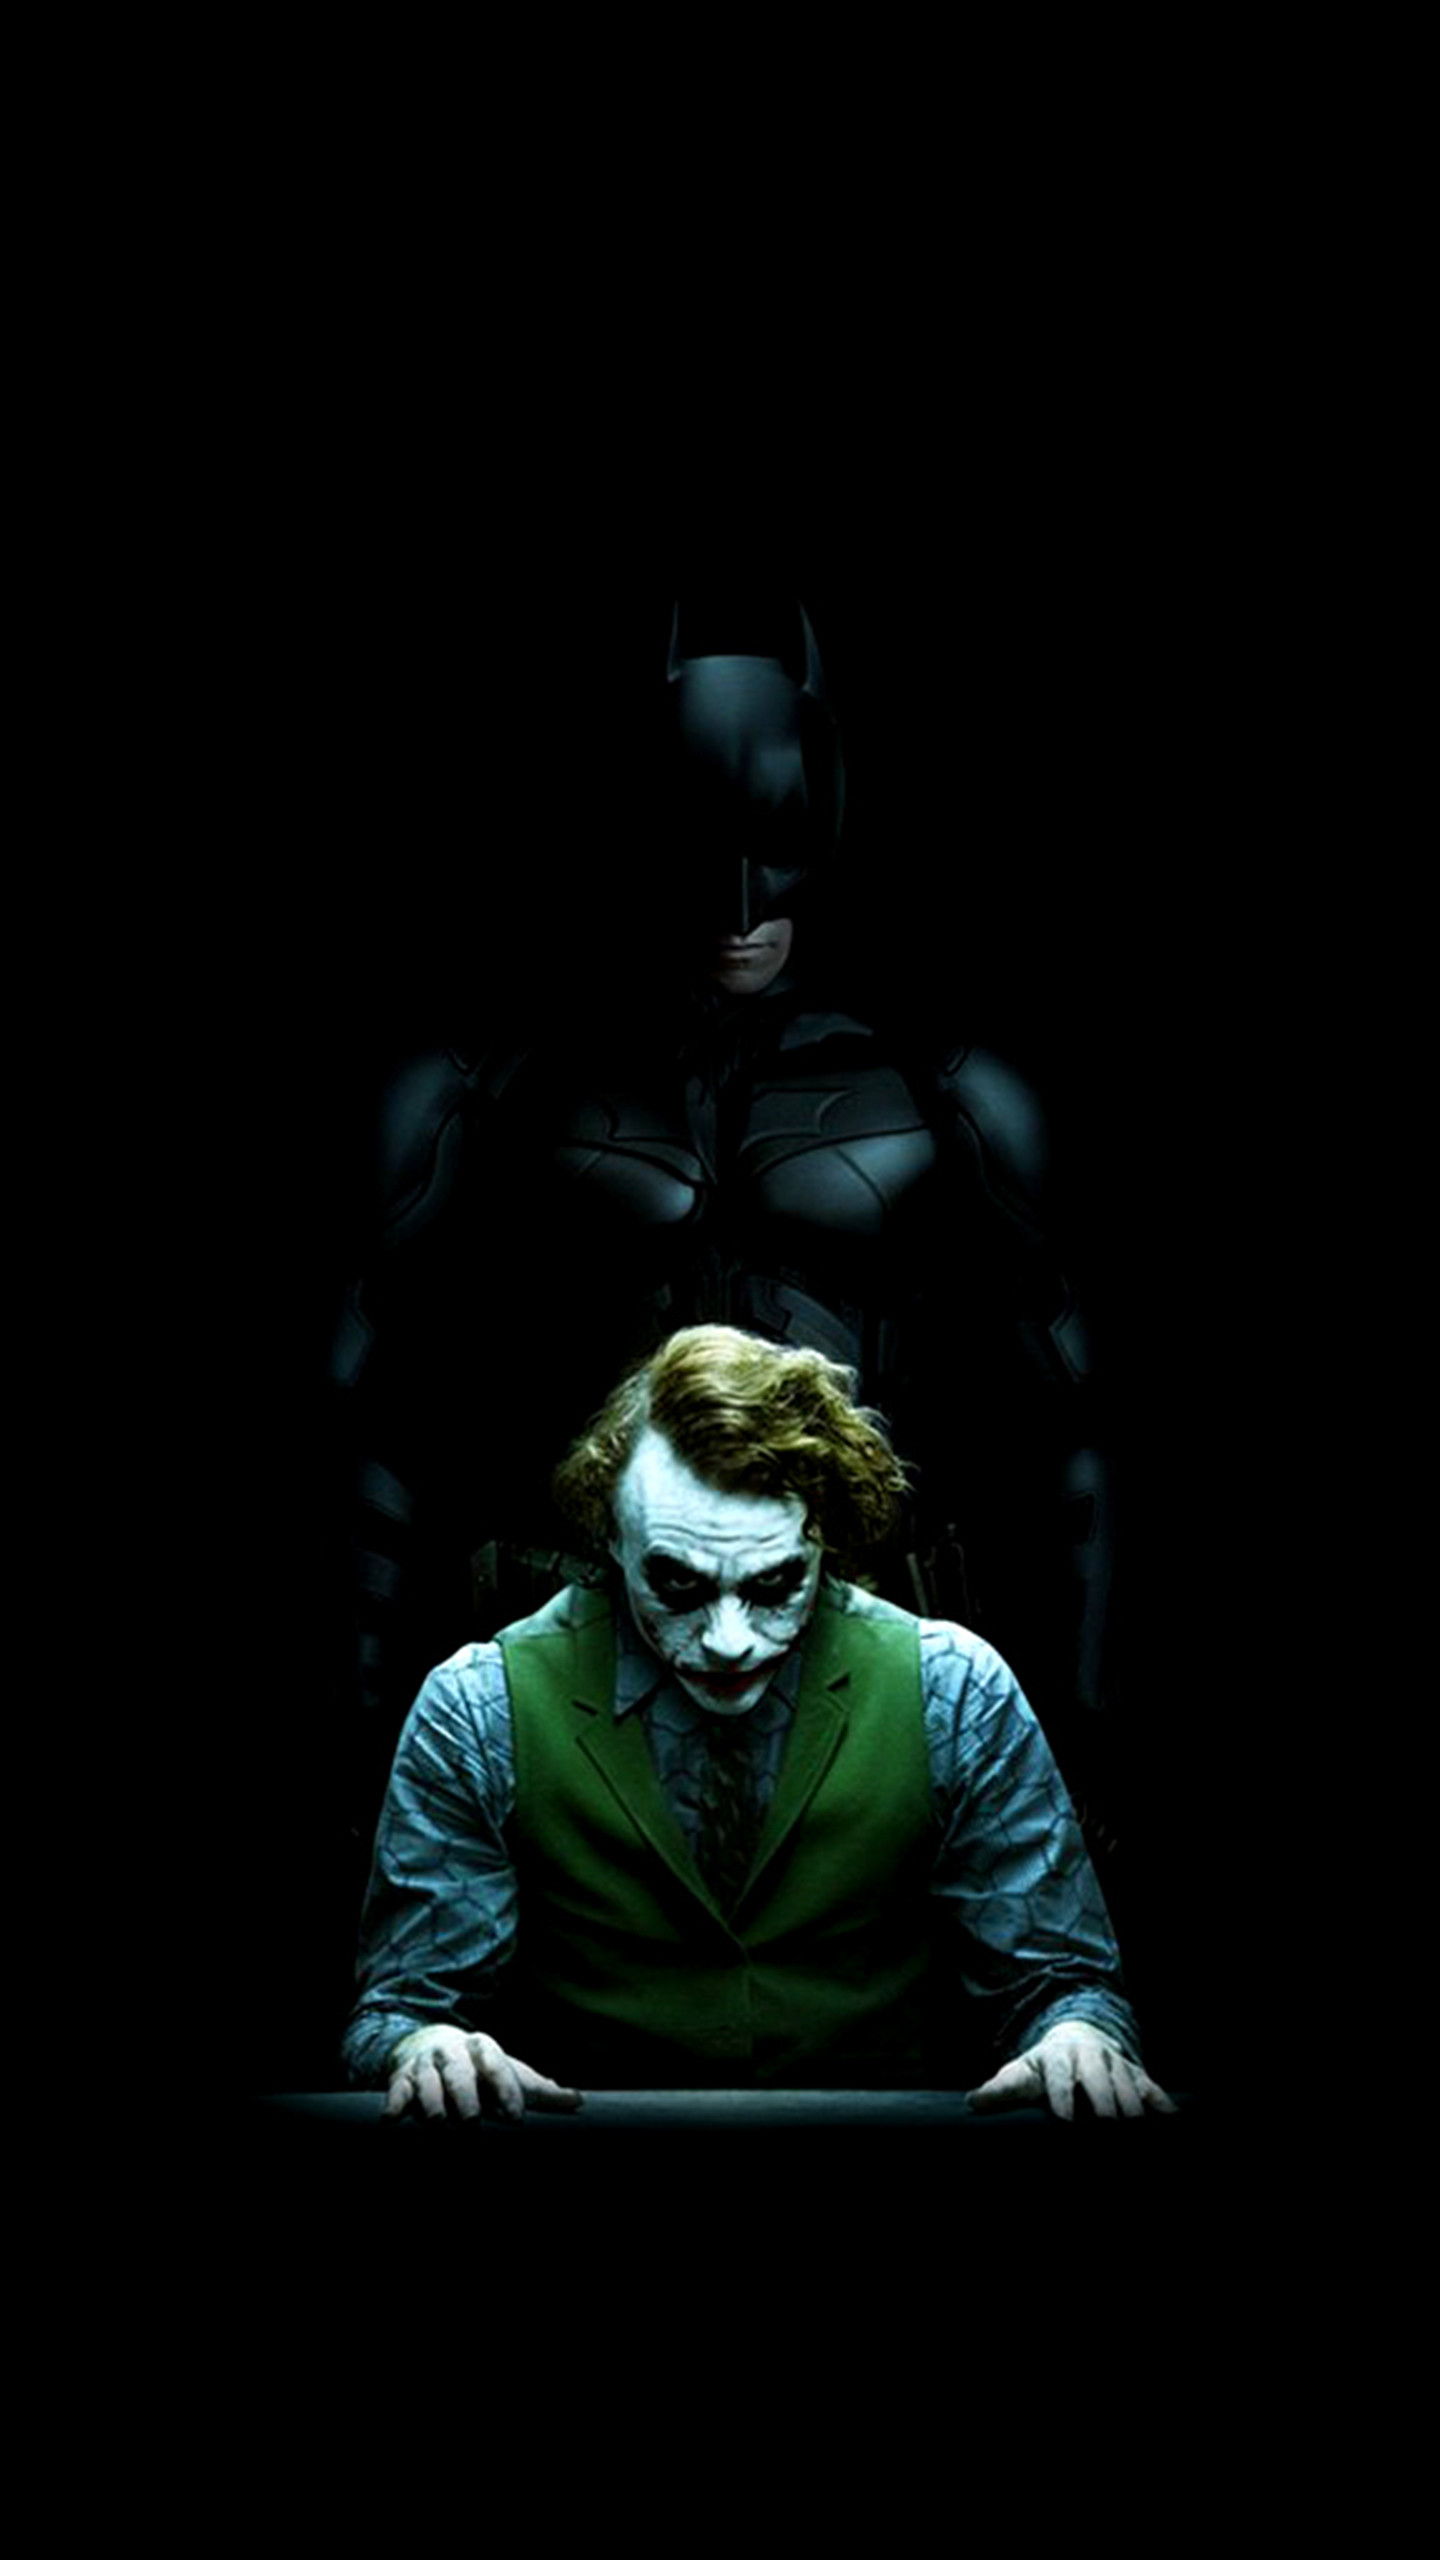 Batman and Joker – The Dark Knight â ¤â ¤. Find this Pin and more on Amoled  Lockscreen Homescreen Wallpapers …